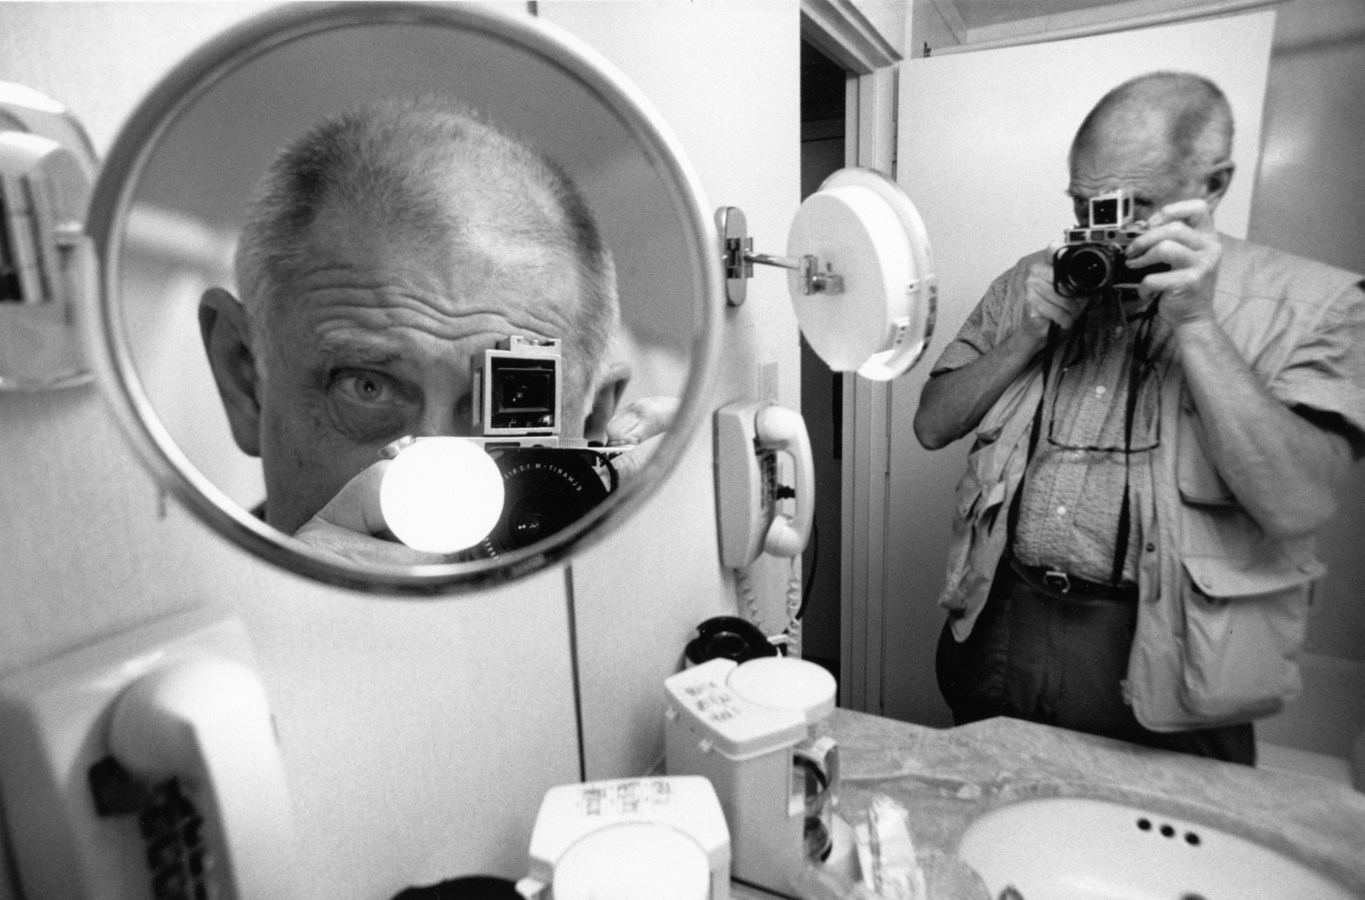 A black and white photograph of a self portrait of the artist in the reflection of two different bathroom mirrors